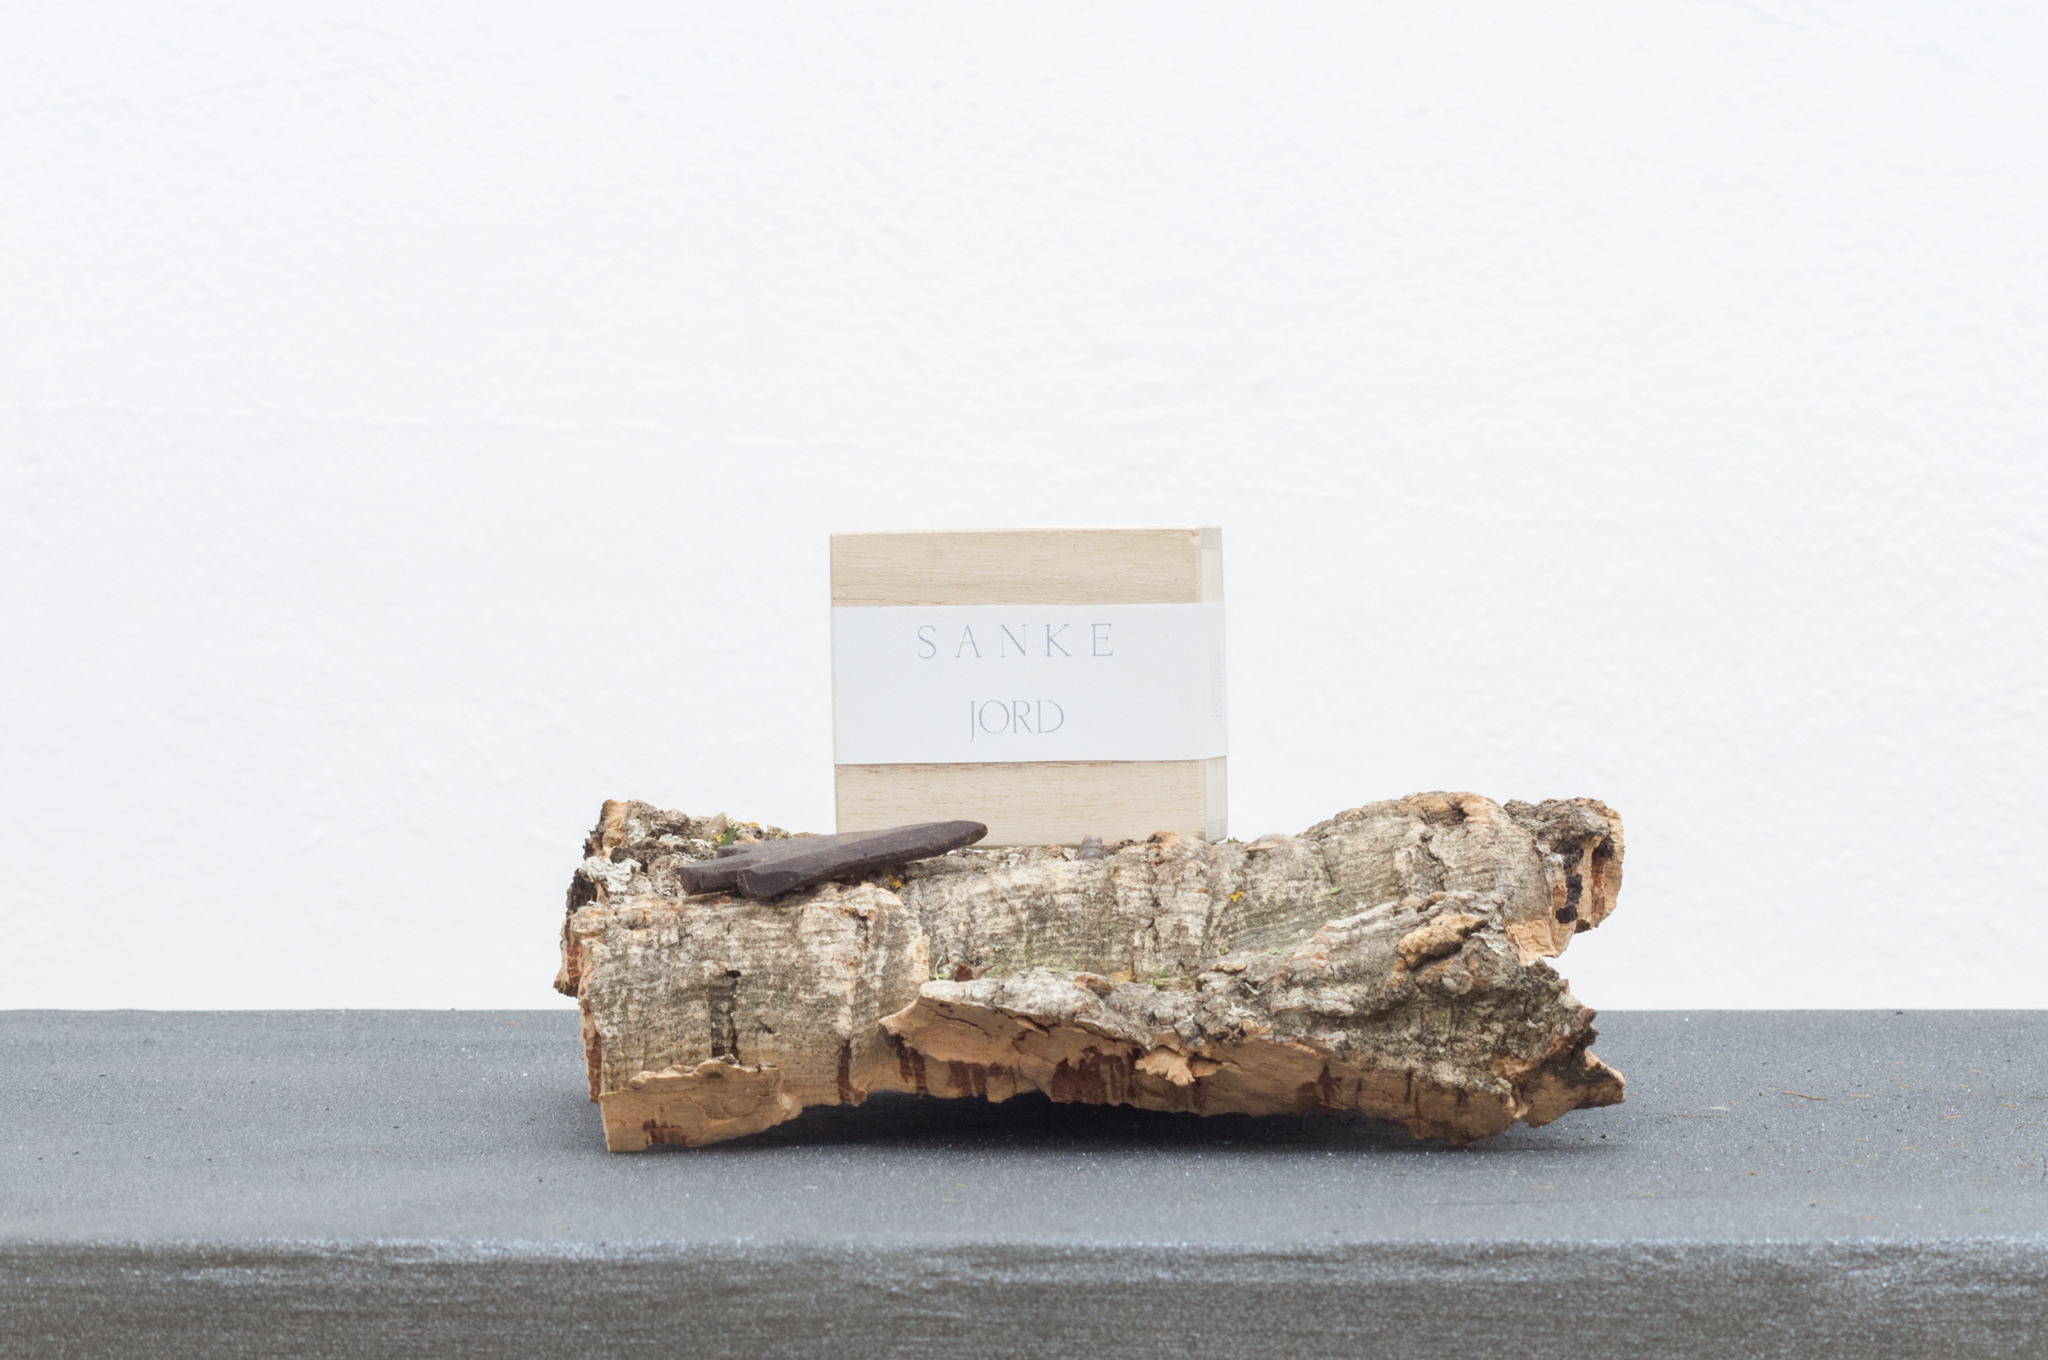 Andreas Ervik, 'S A N K E' (2017). JORD (chocolate made with fair trade biodynamic cocoa mixed with earth containing 15 strains of beneficial microorganisms, container in birch wood)